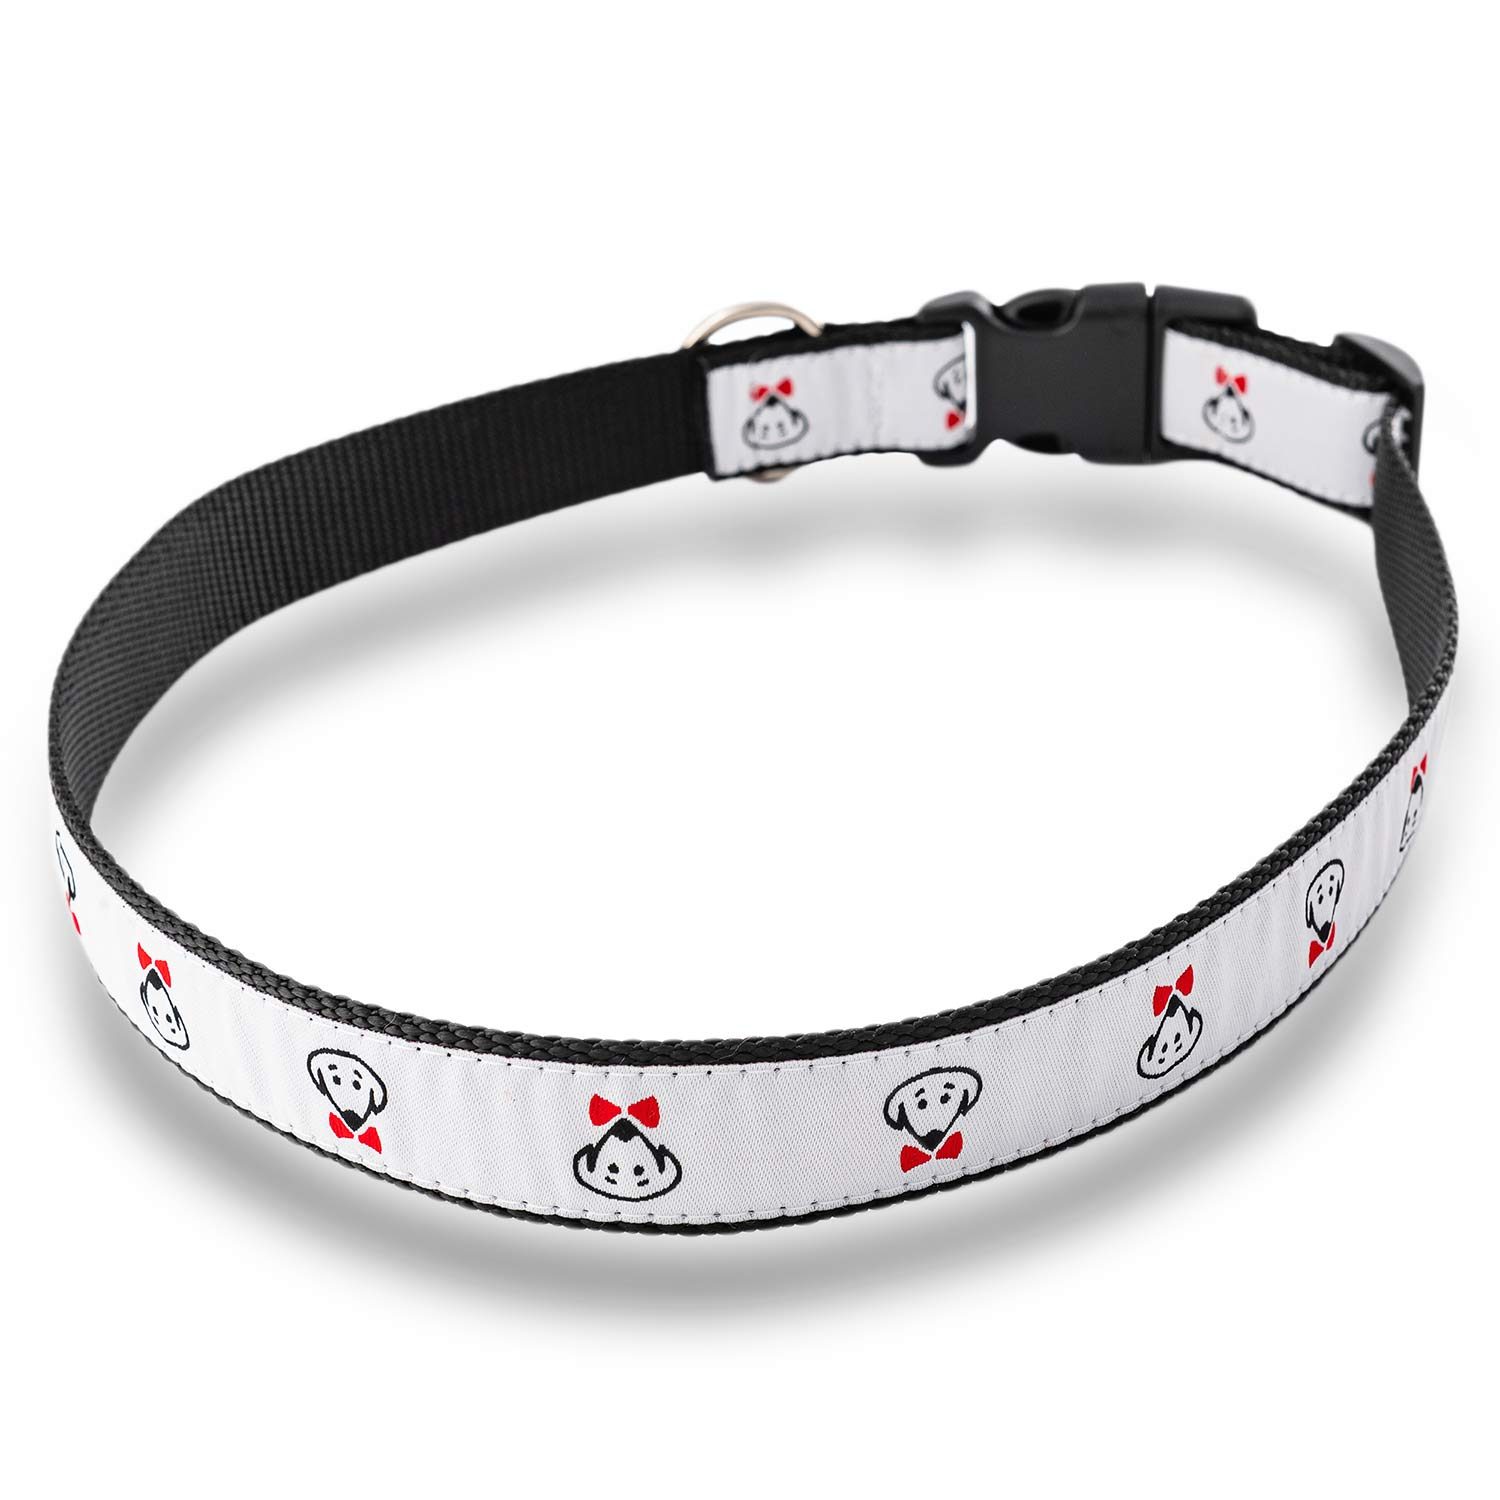 Pet Collar by Beau Tyler in Large size